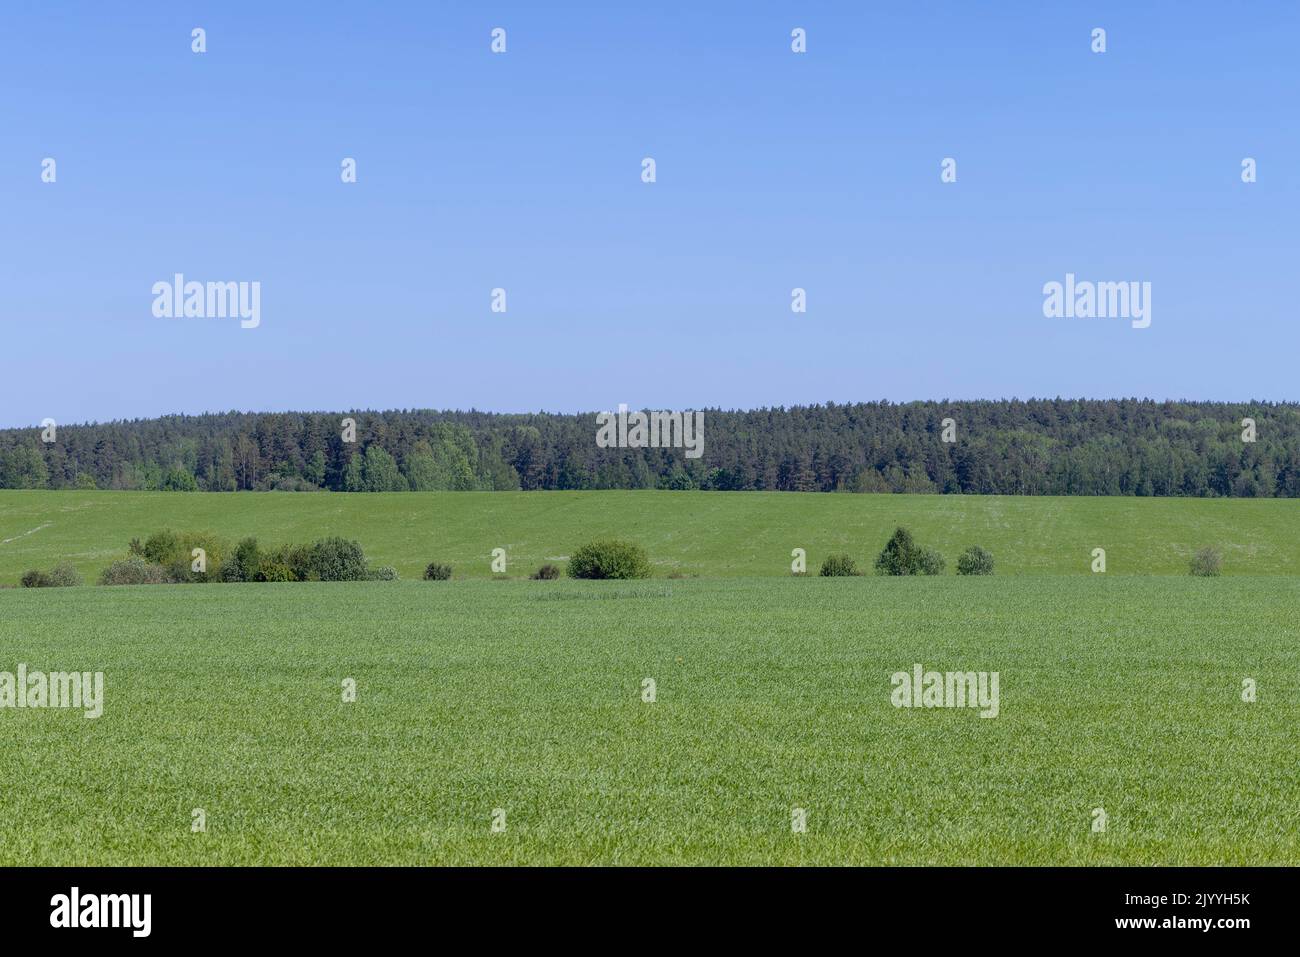 An agricultural field where green cereals grow, a field where wheat and other cereals are grown to produce food Stock Photo